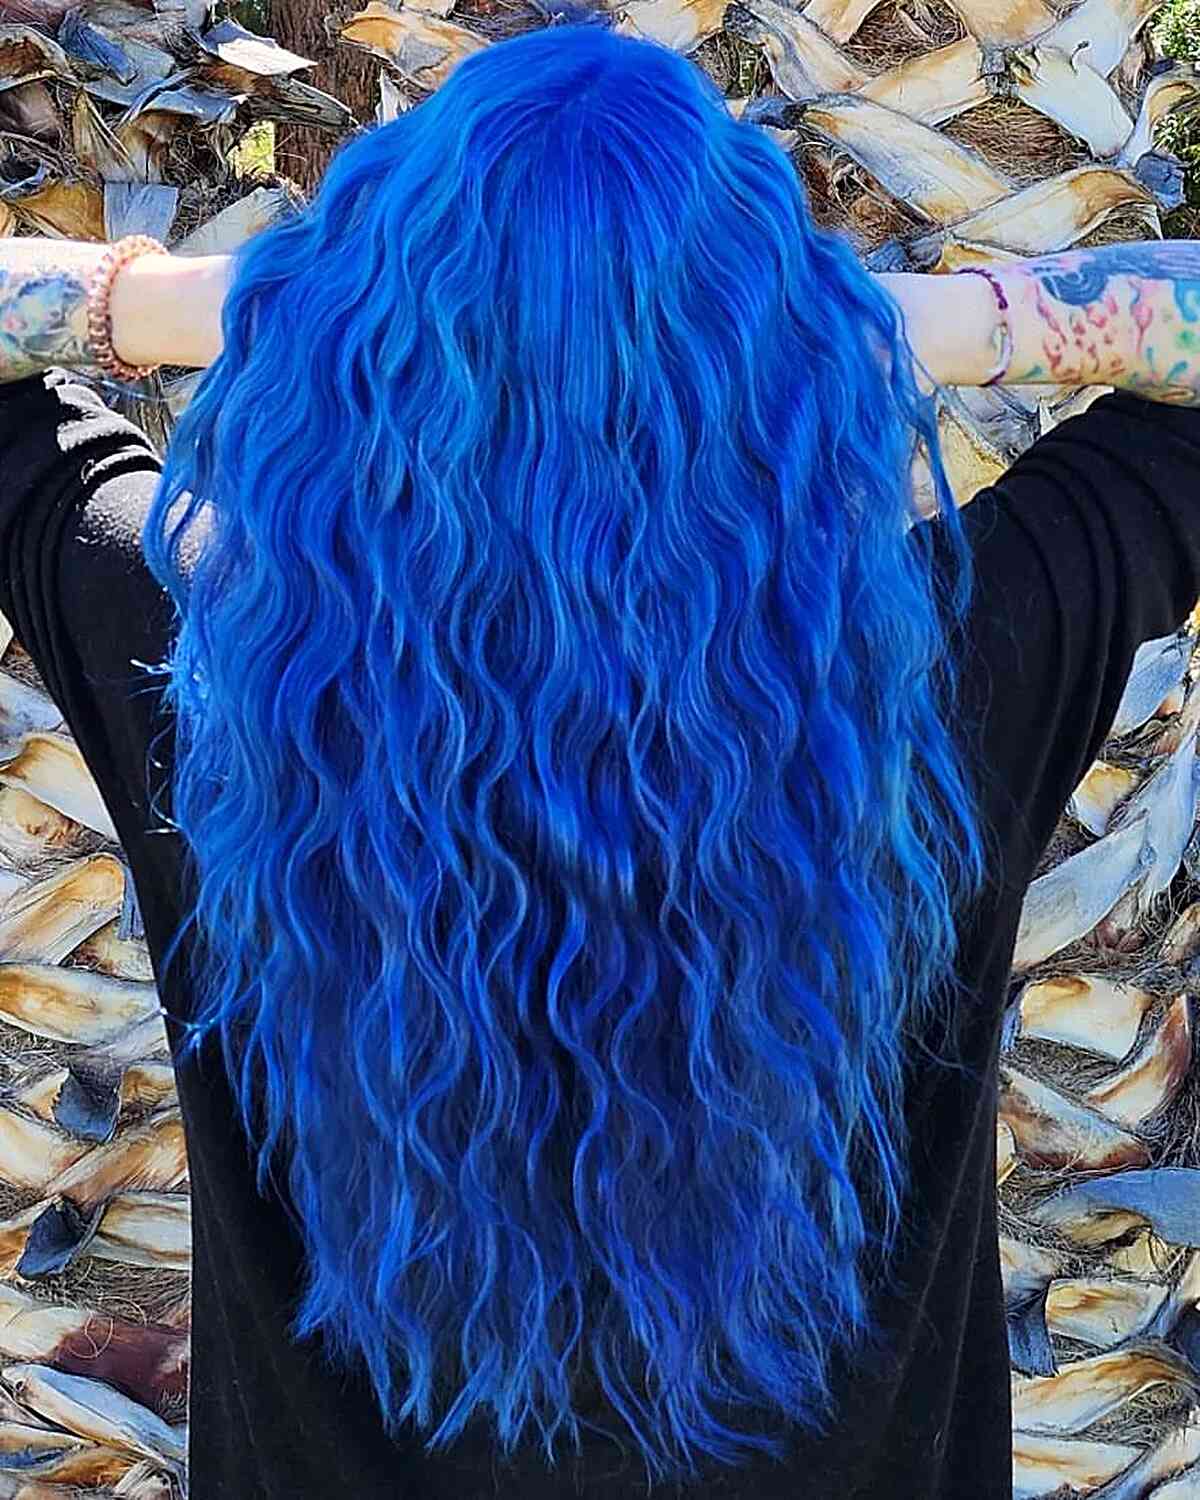 Sexy Blue Hair with Mermaid Waves for women with long hair